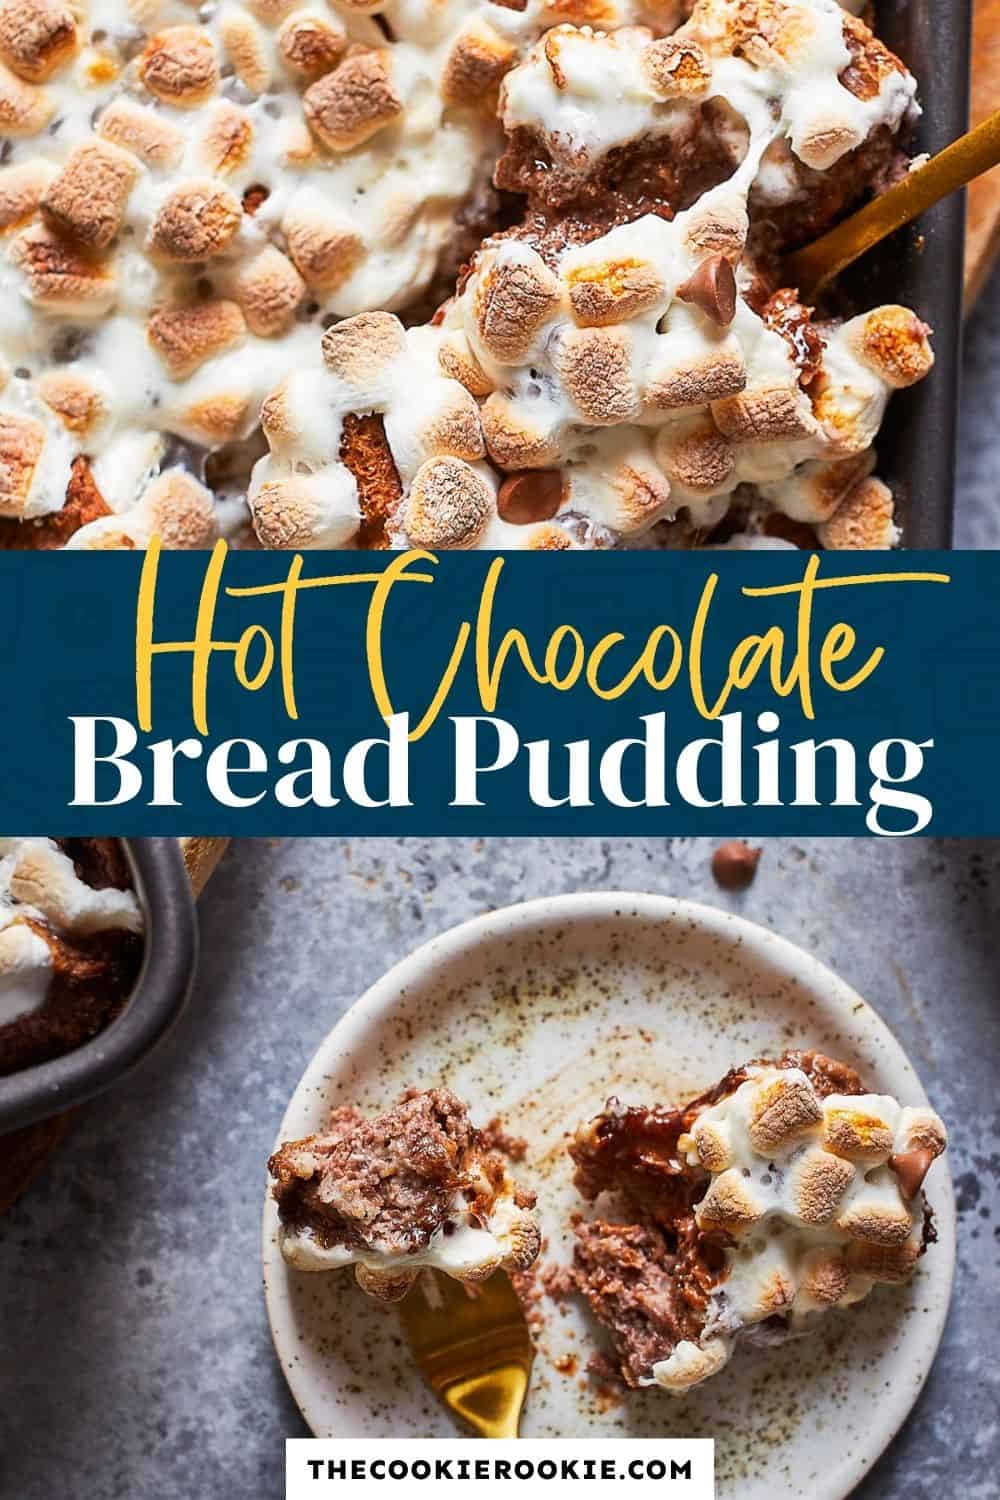 Hot Chocolate Bread Pudding Recipe - The Cookie Rookie®